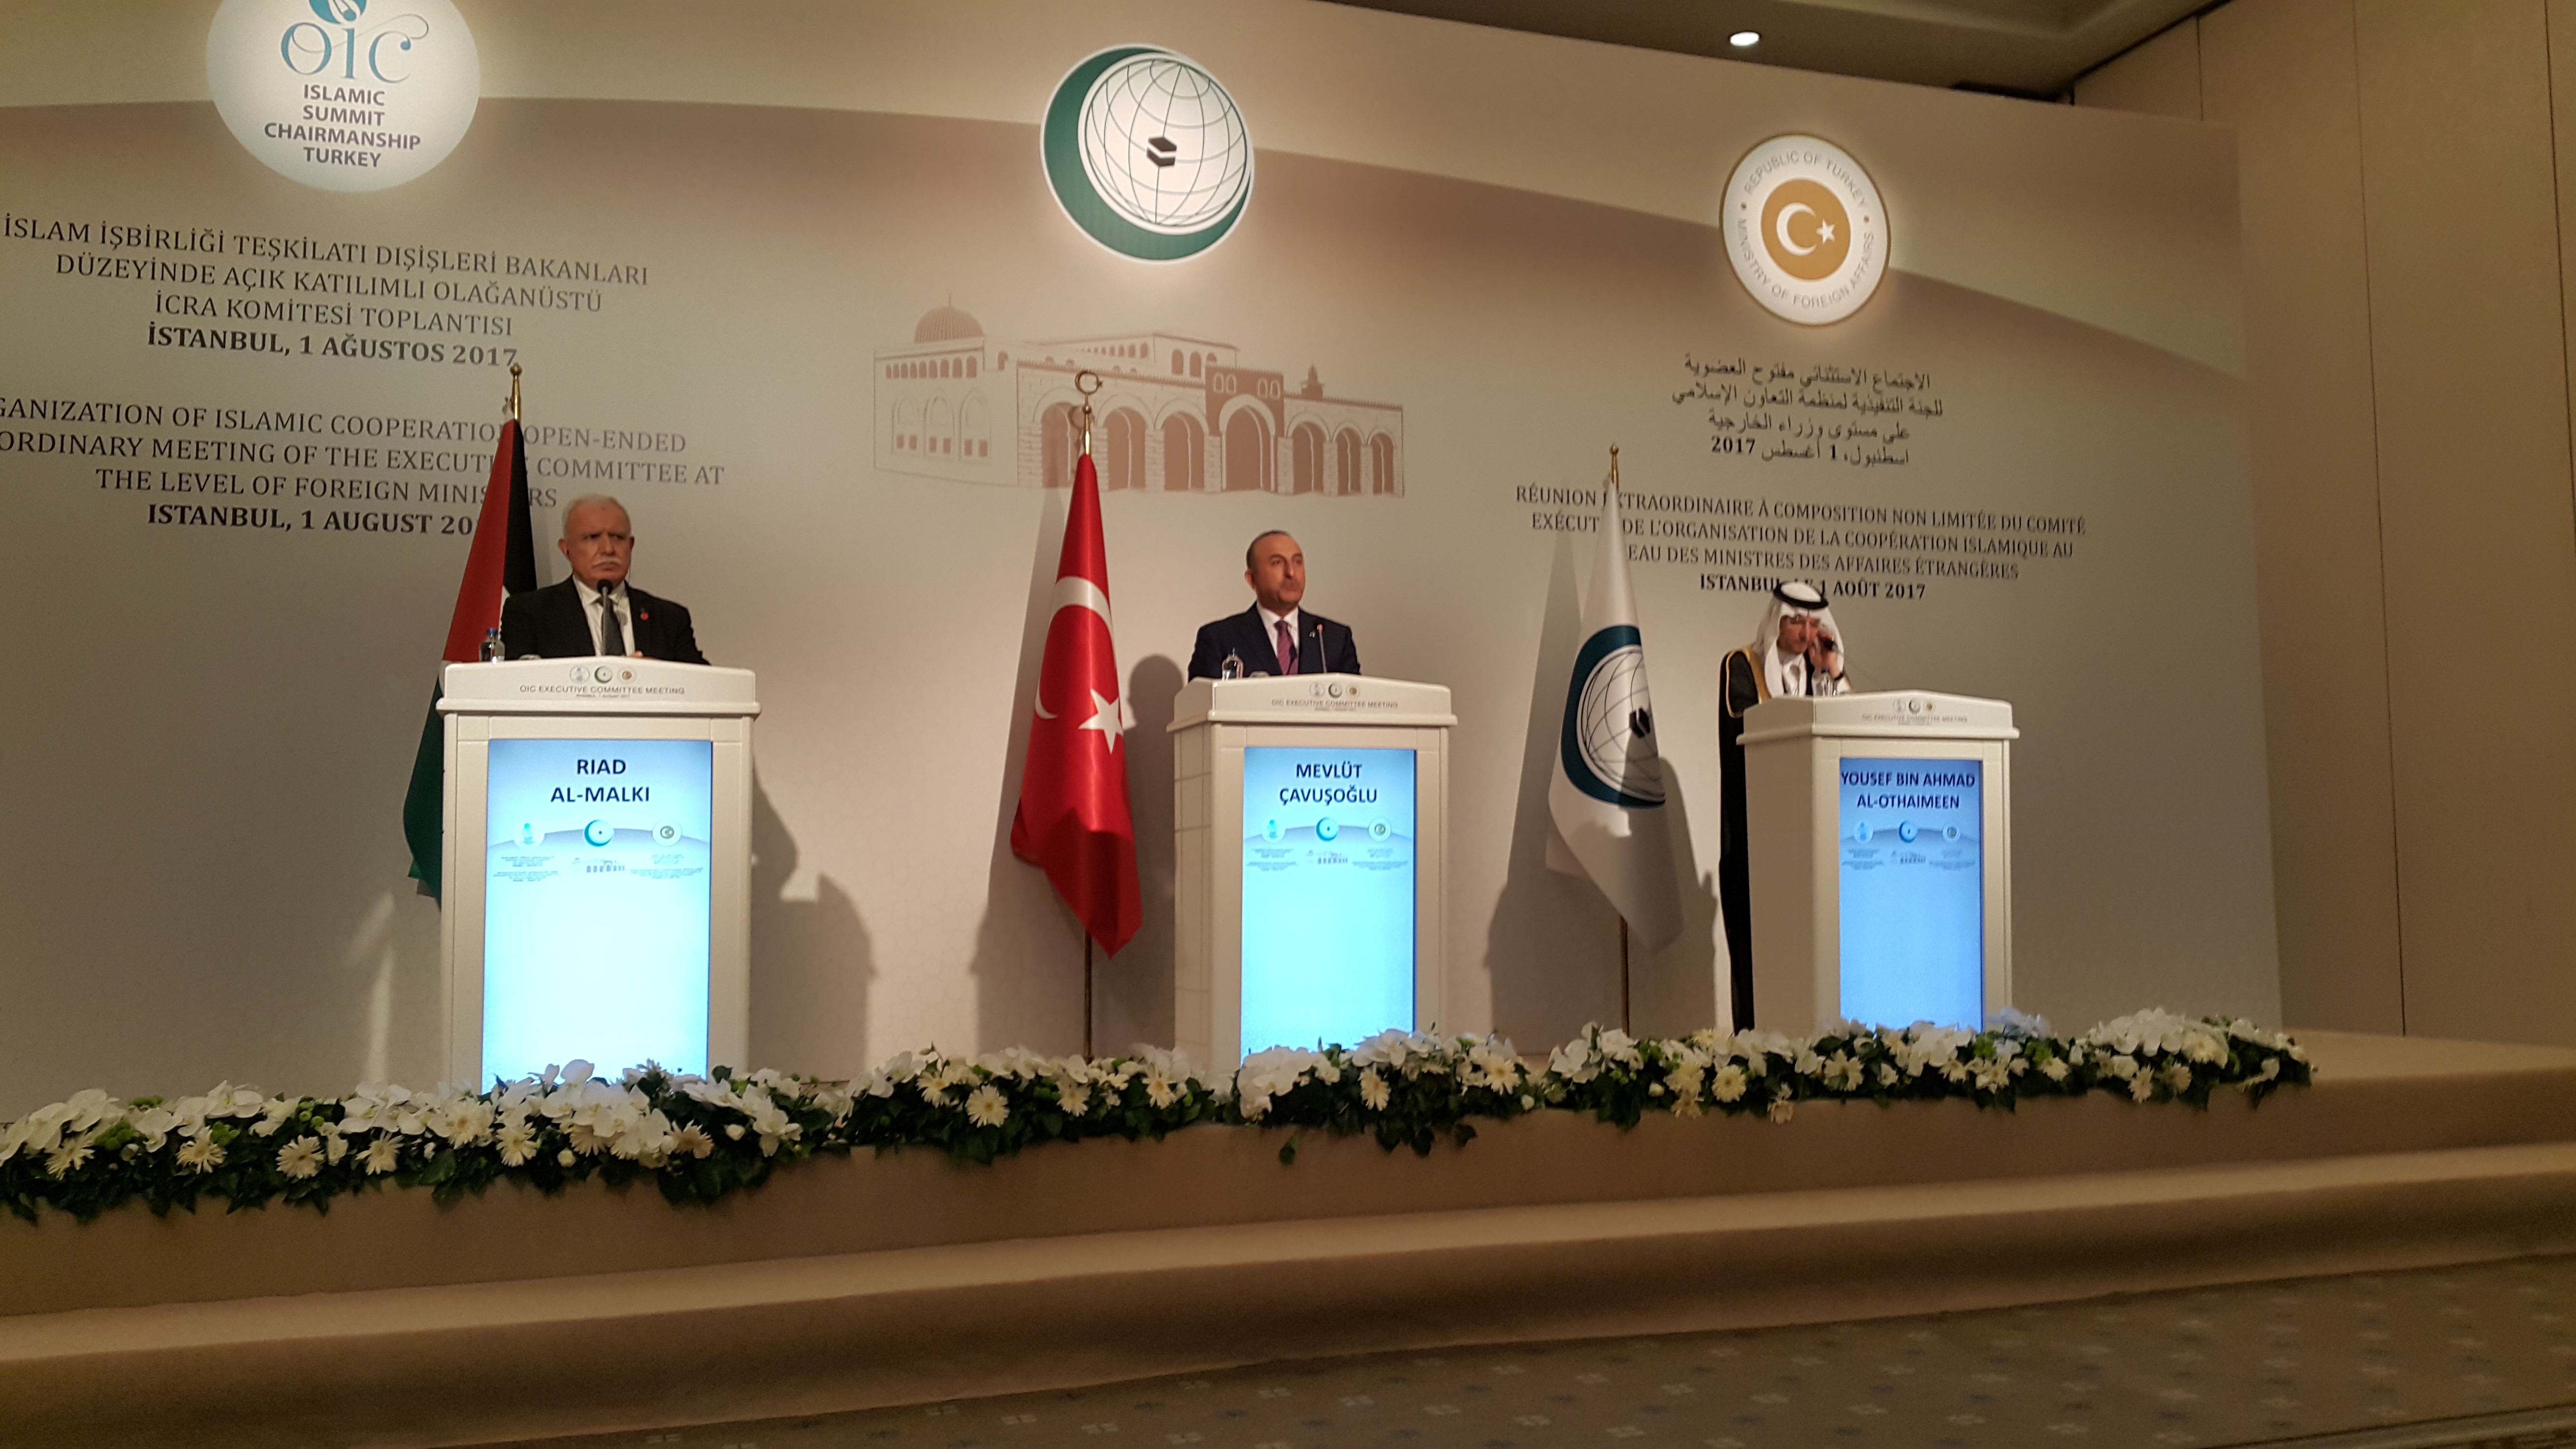 The joint press conference by the Turkish foreign minister and the OIC chief